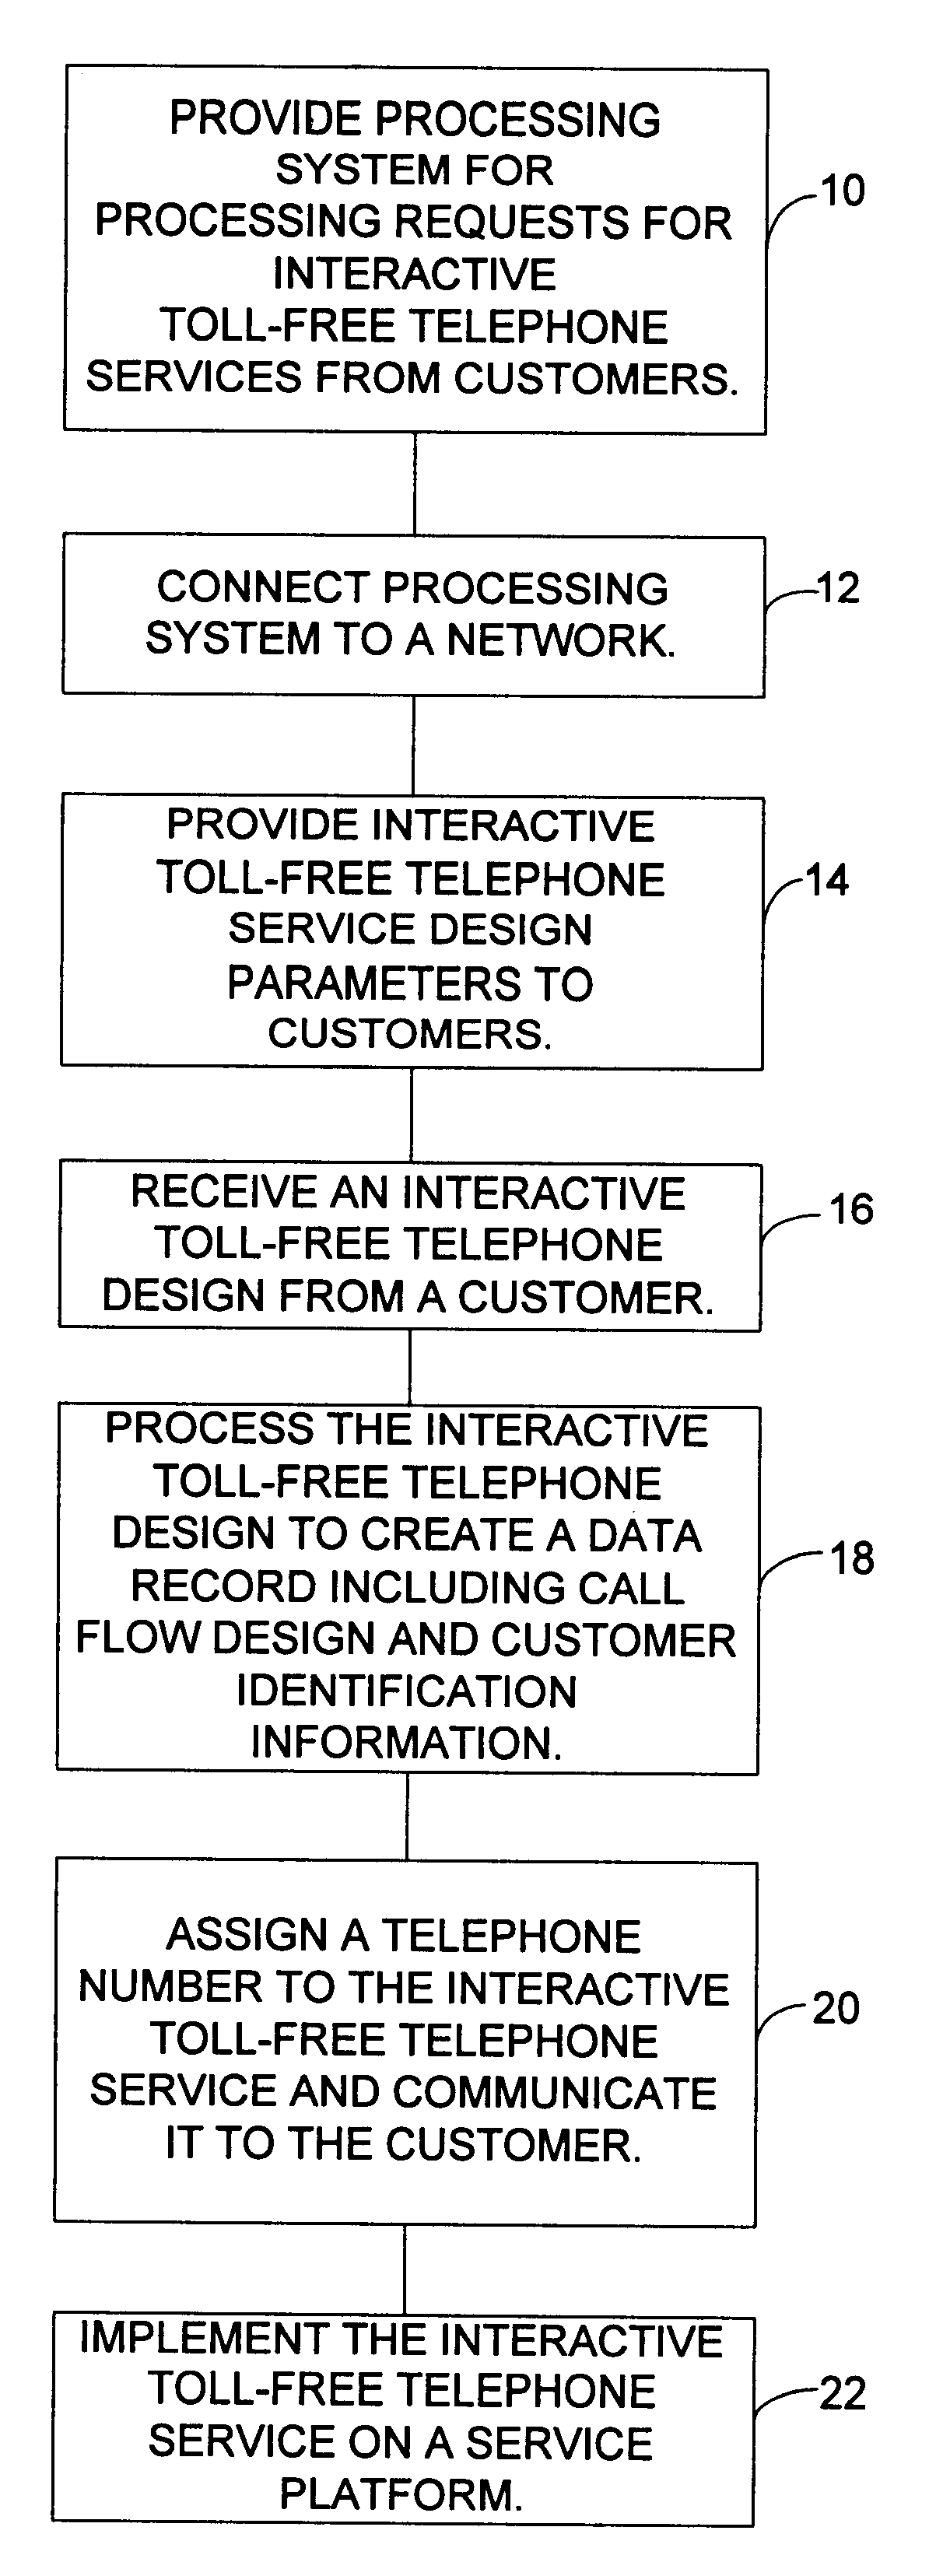 Interactive toll-free telephone service automation